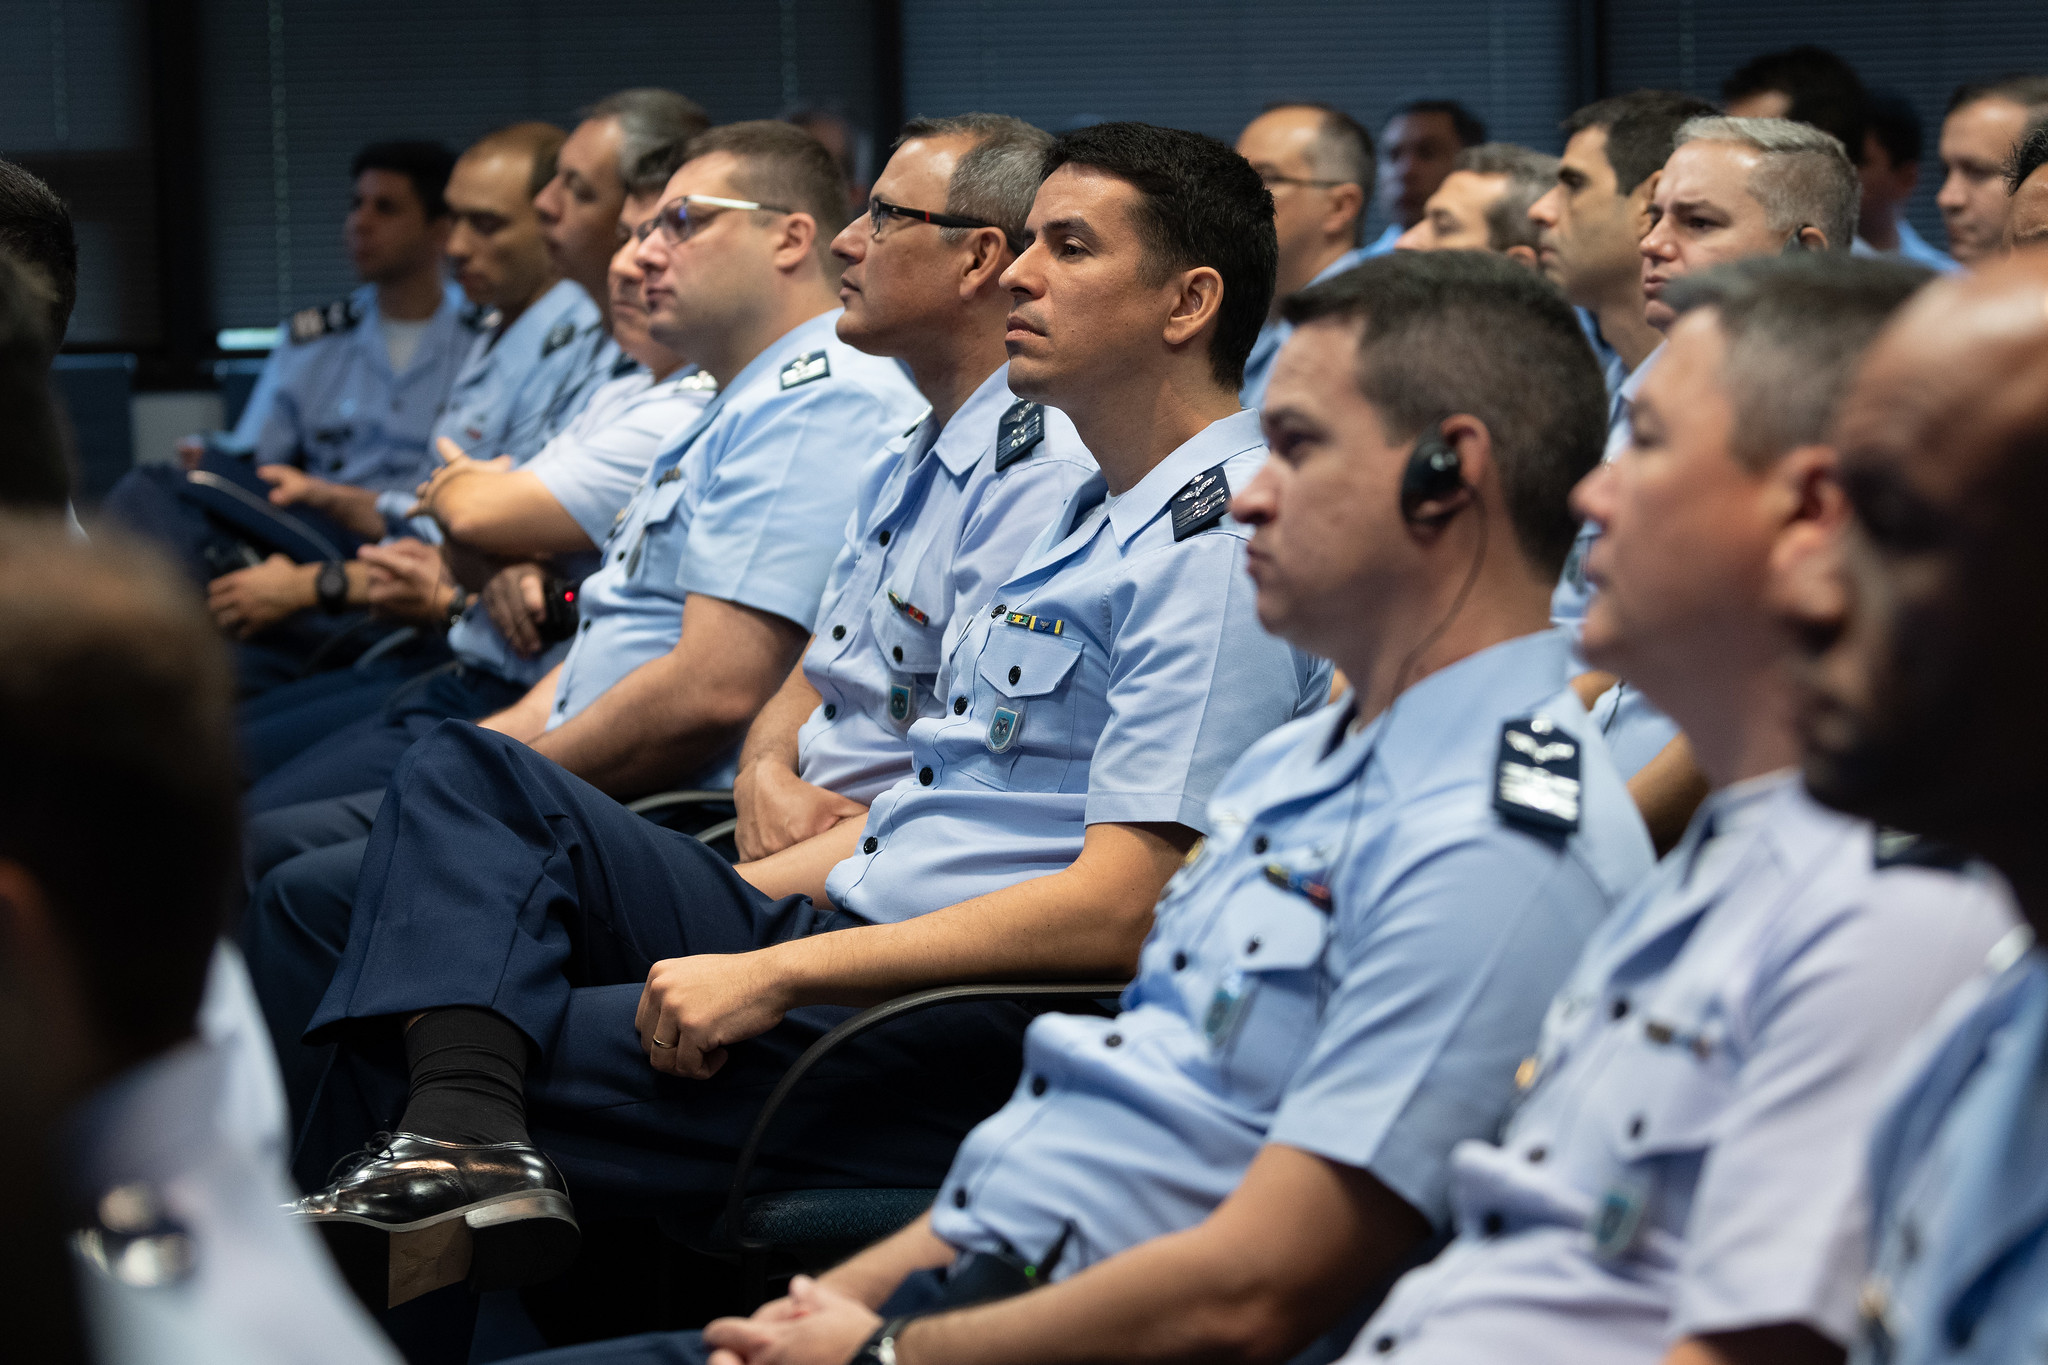 Members of the Brazilian Air Force attend a Mitchell Institute lecture at AFA headquarters in Arlington, Va.